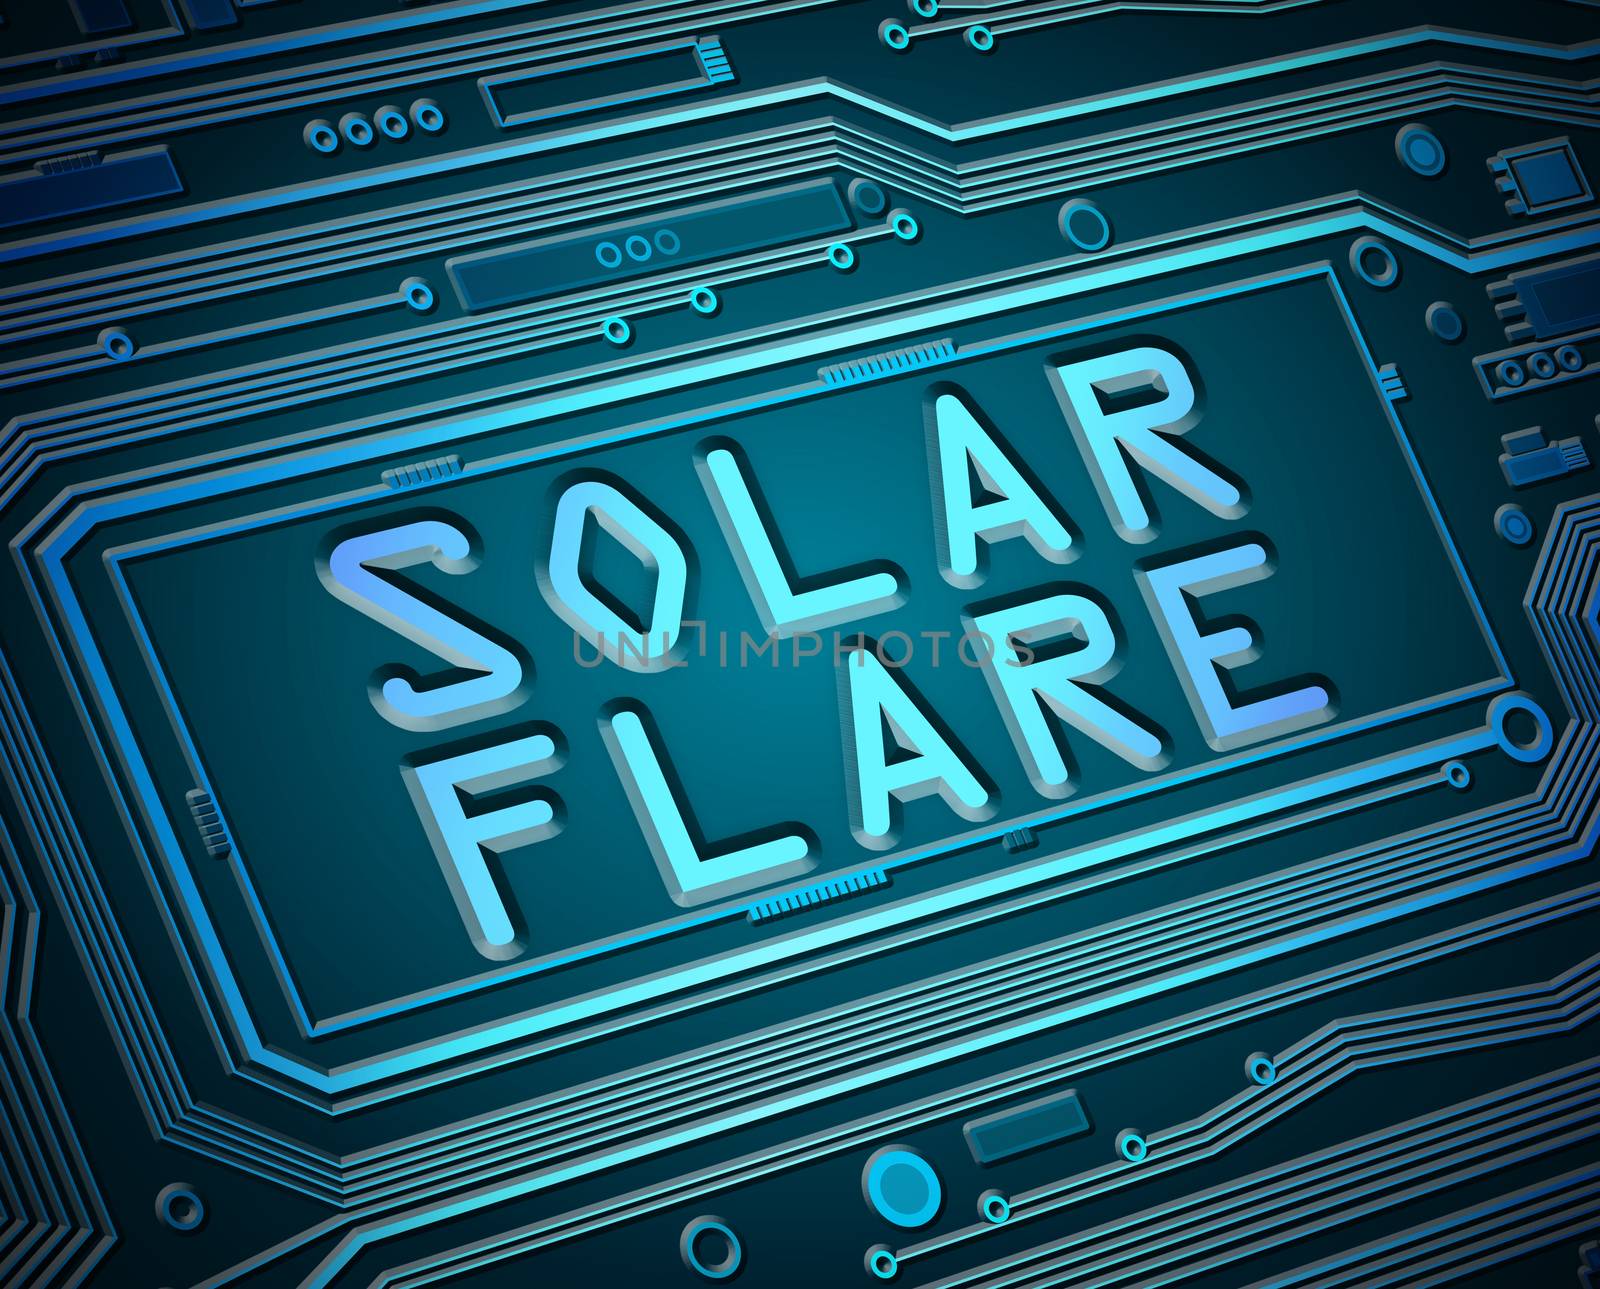 Abstract style illustration depicting printed circuit board components with a solar flare concept.